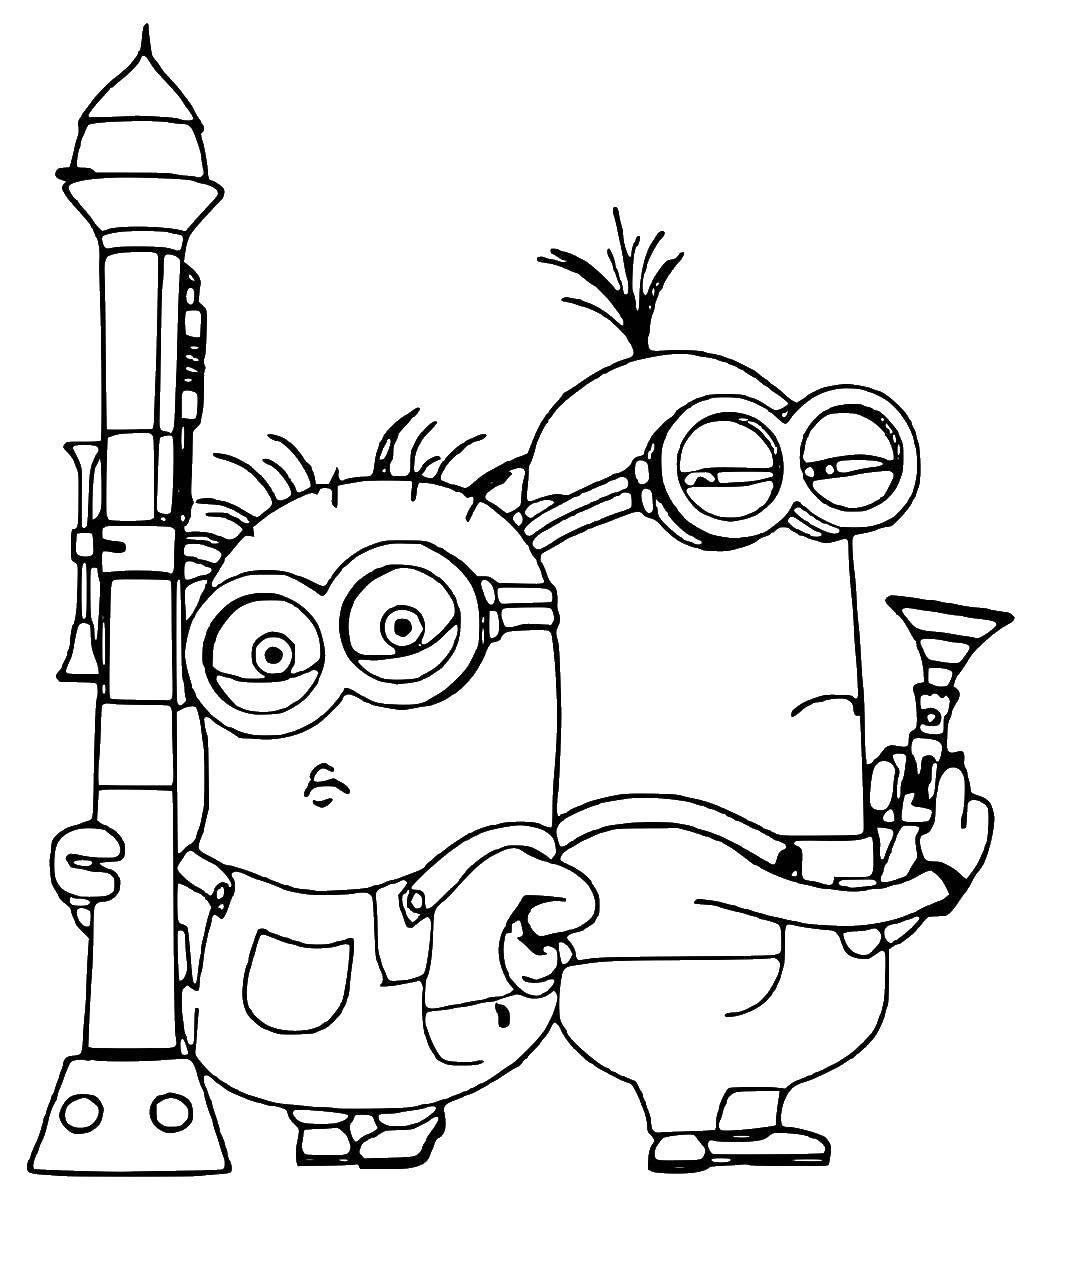 Coloring Minions with guns. Category the minions. Tags:  , Mignon, .